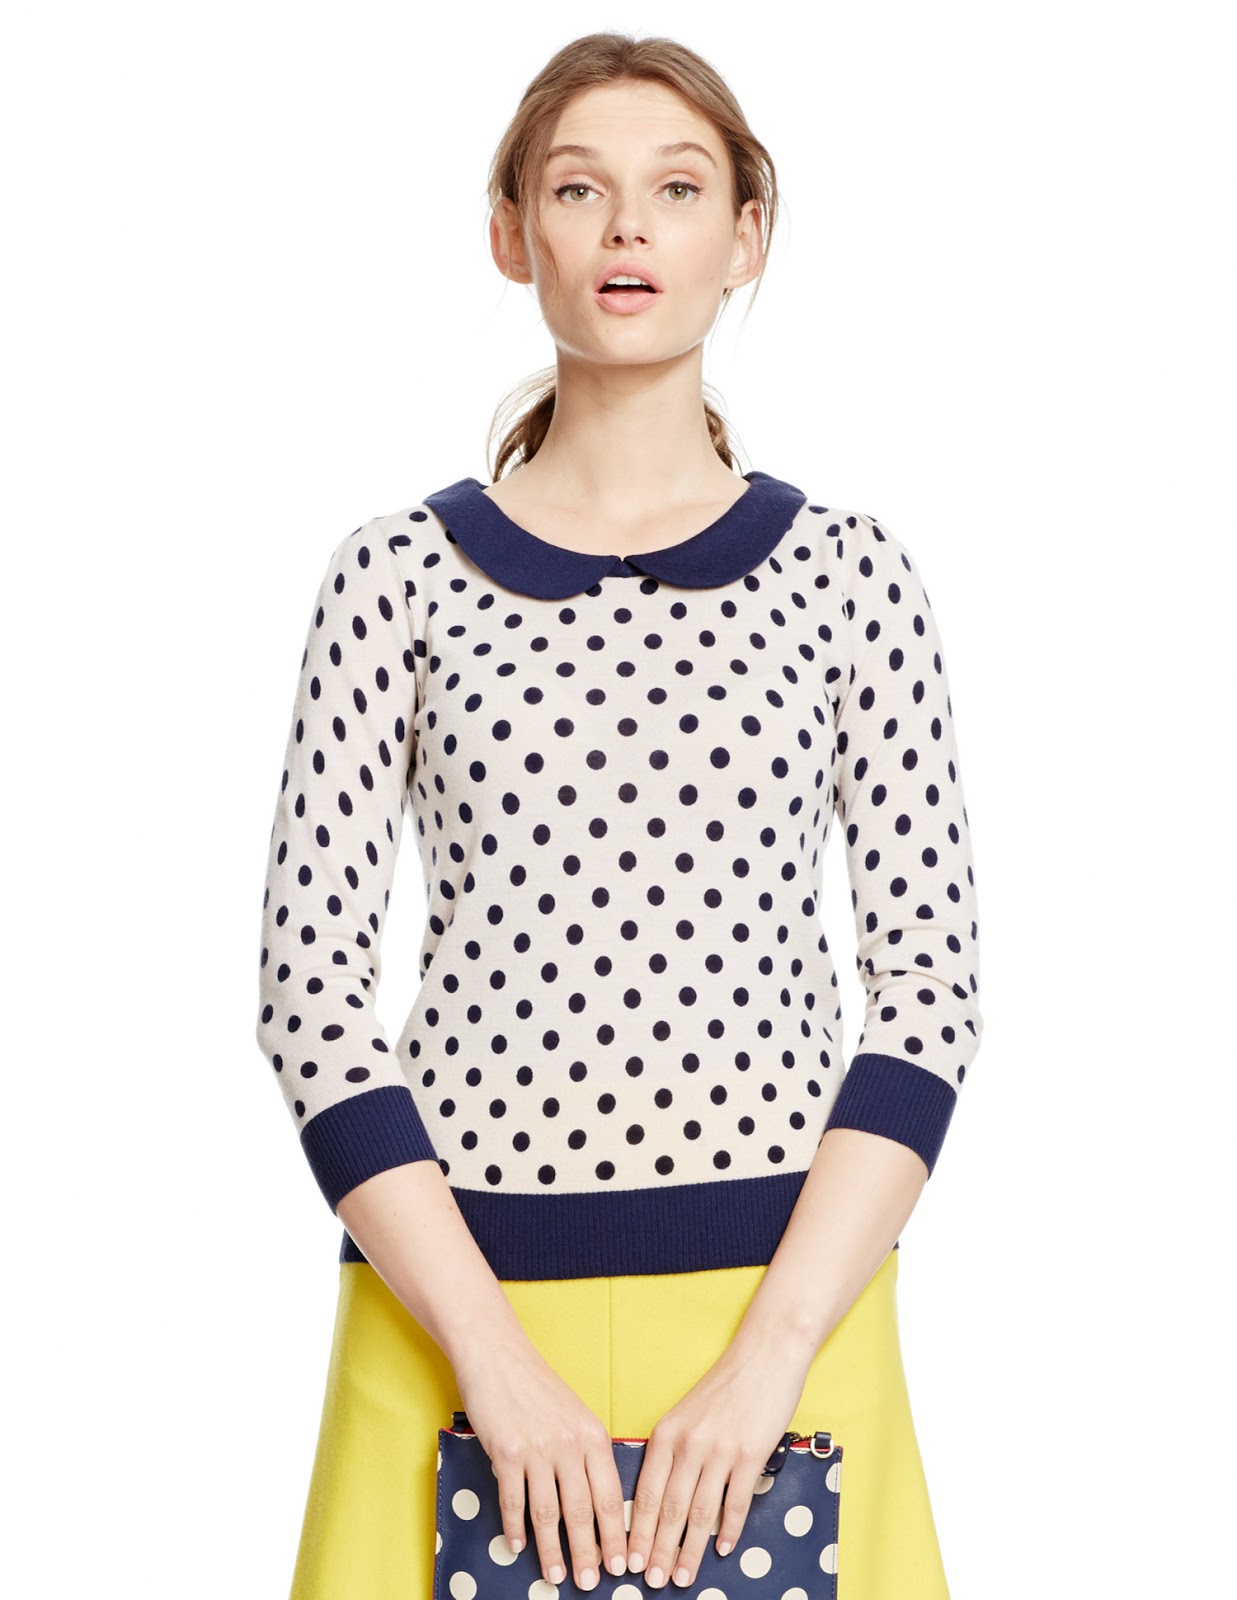 Boden Fall London Collection